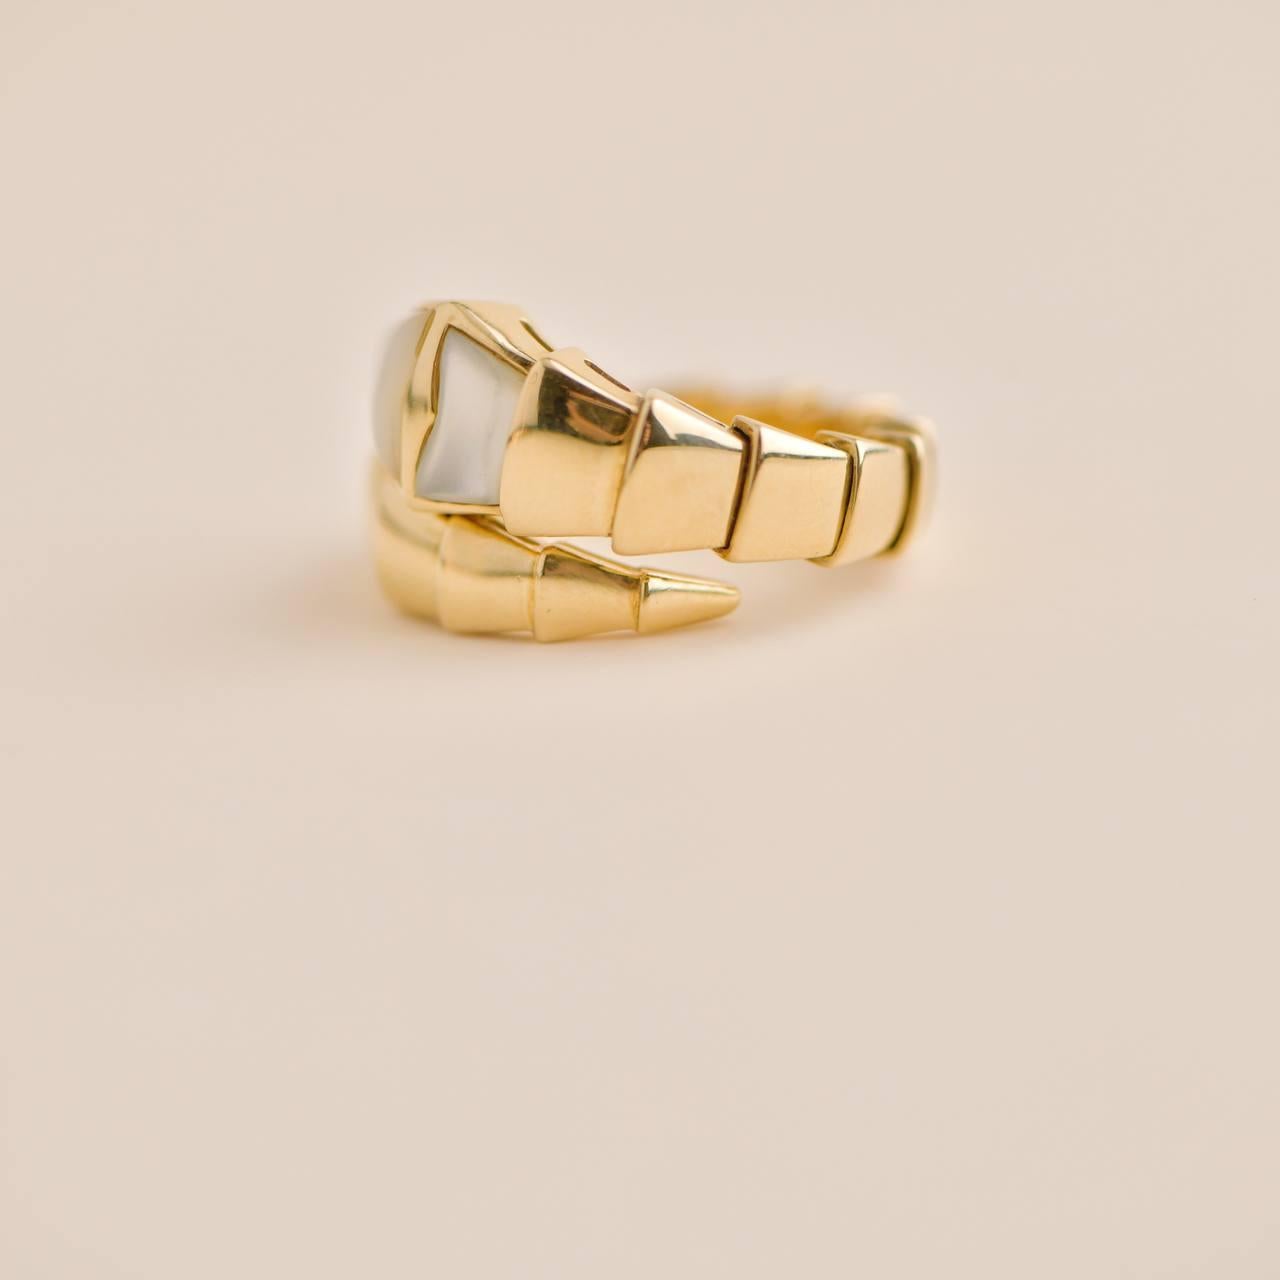 Bvlgari 18K Yellow Gold Mother Of Pearl Serpenti Viper Ring Size M In Excellent Condition For Sale In Banbury, GB